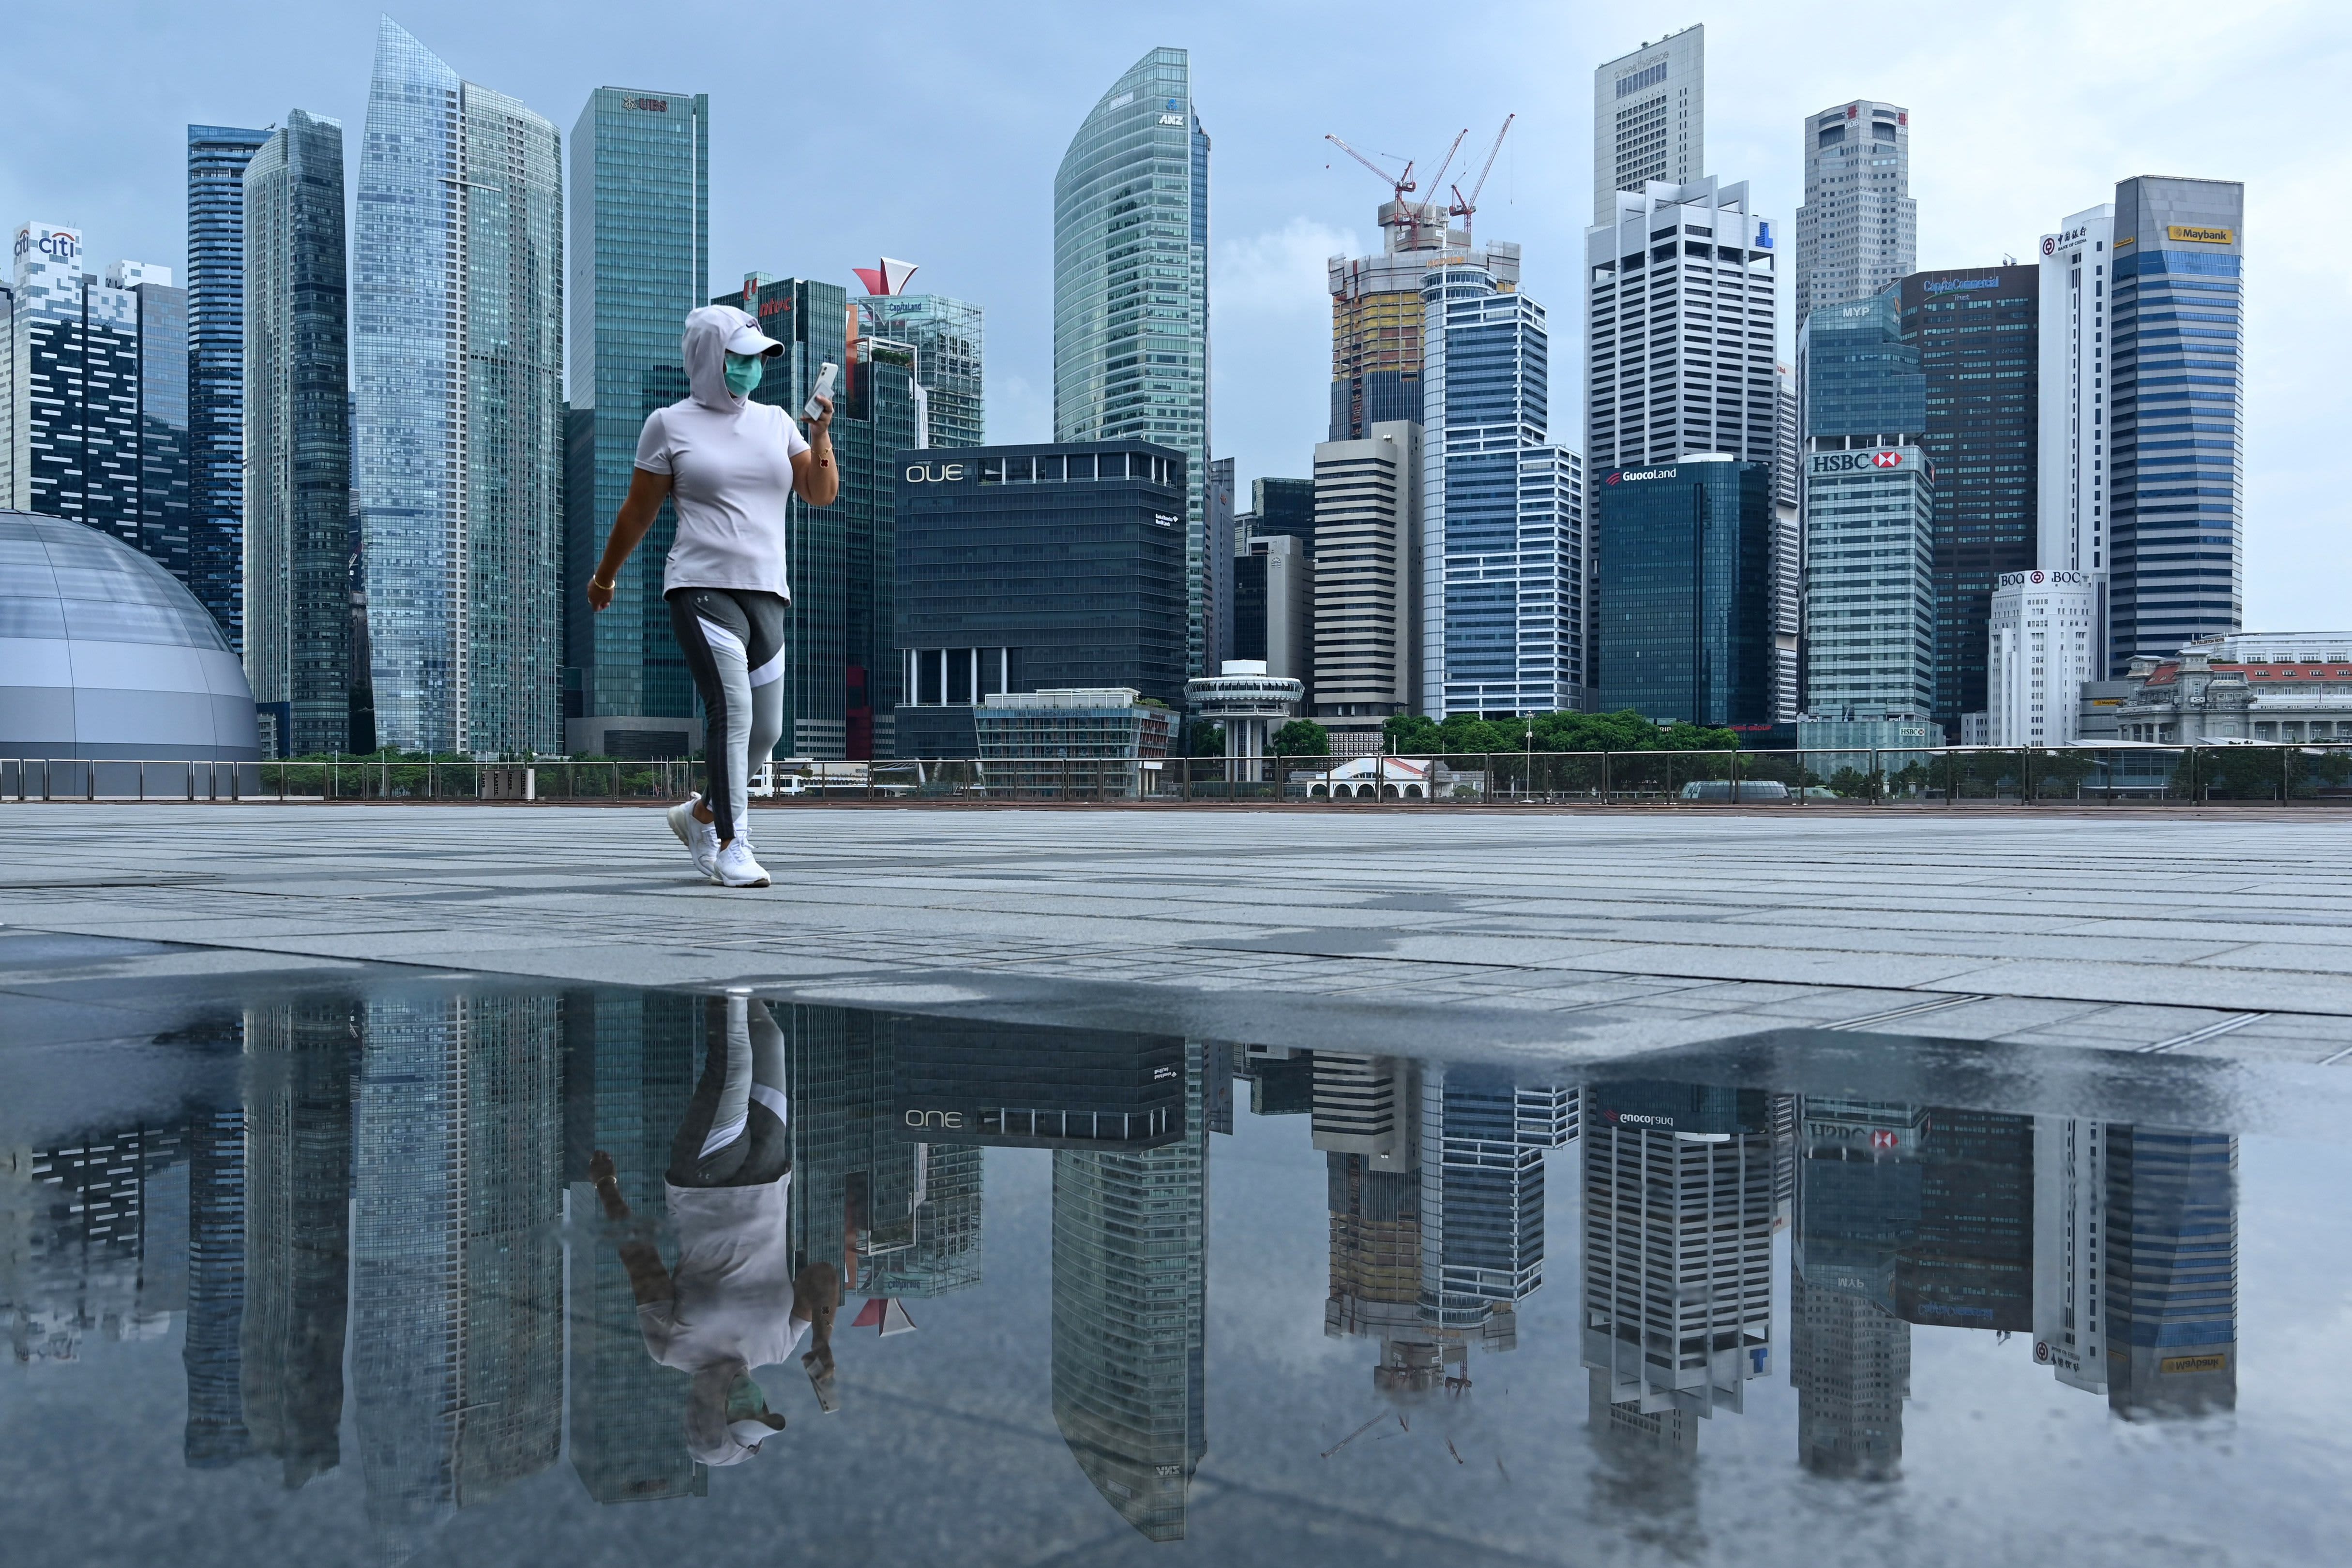 Singapore releases estimates of GDP growth for the fourth quarter of 2020